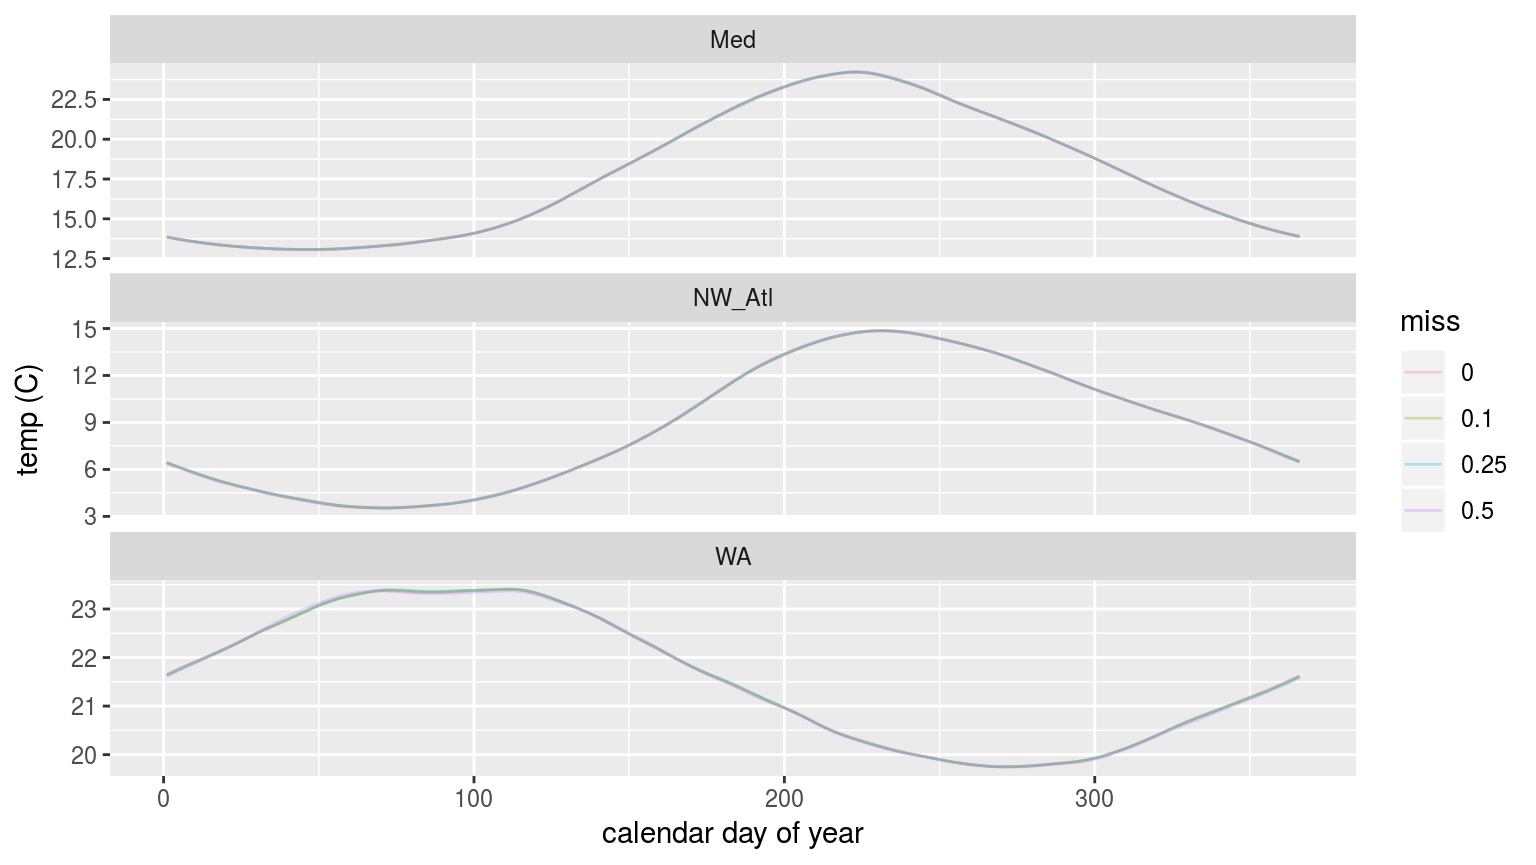 The seasonal signals created from time series with increasingly large proportions of missing data.